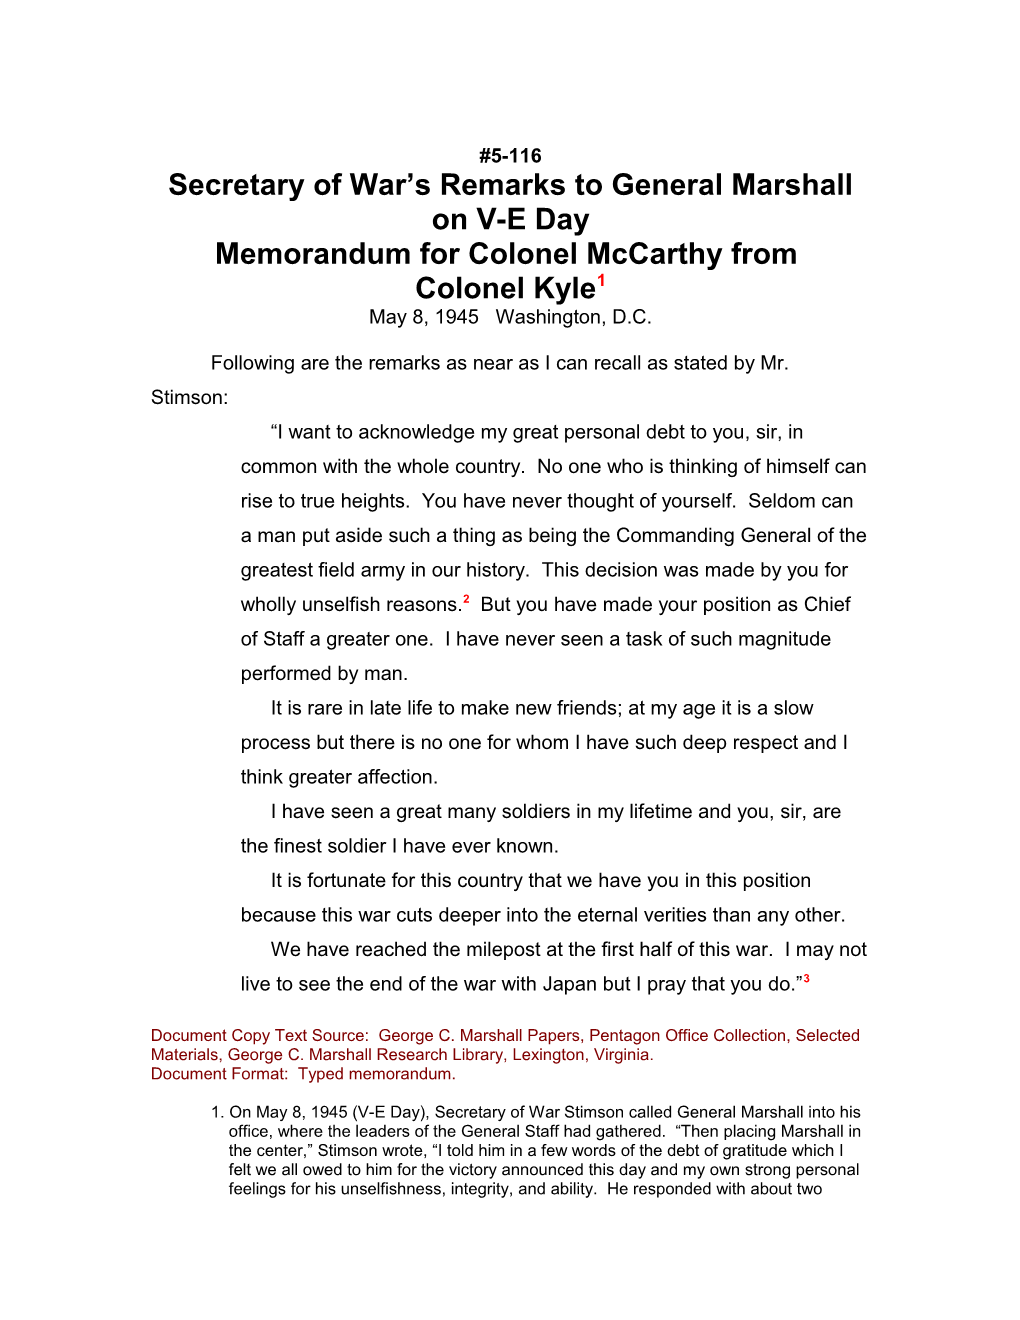 Secretary of War S Remarks to General Marshall on V-E Day